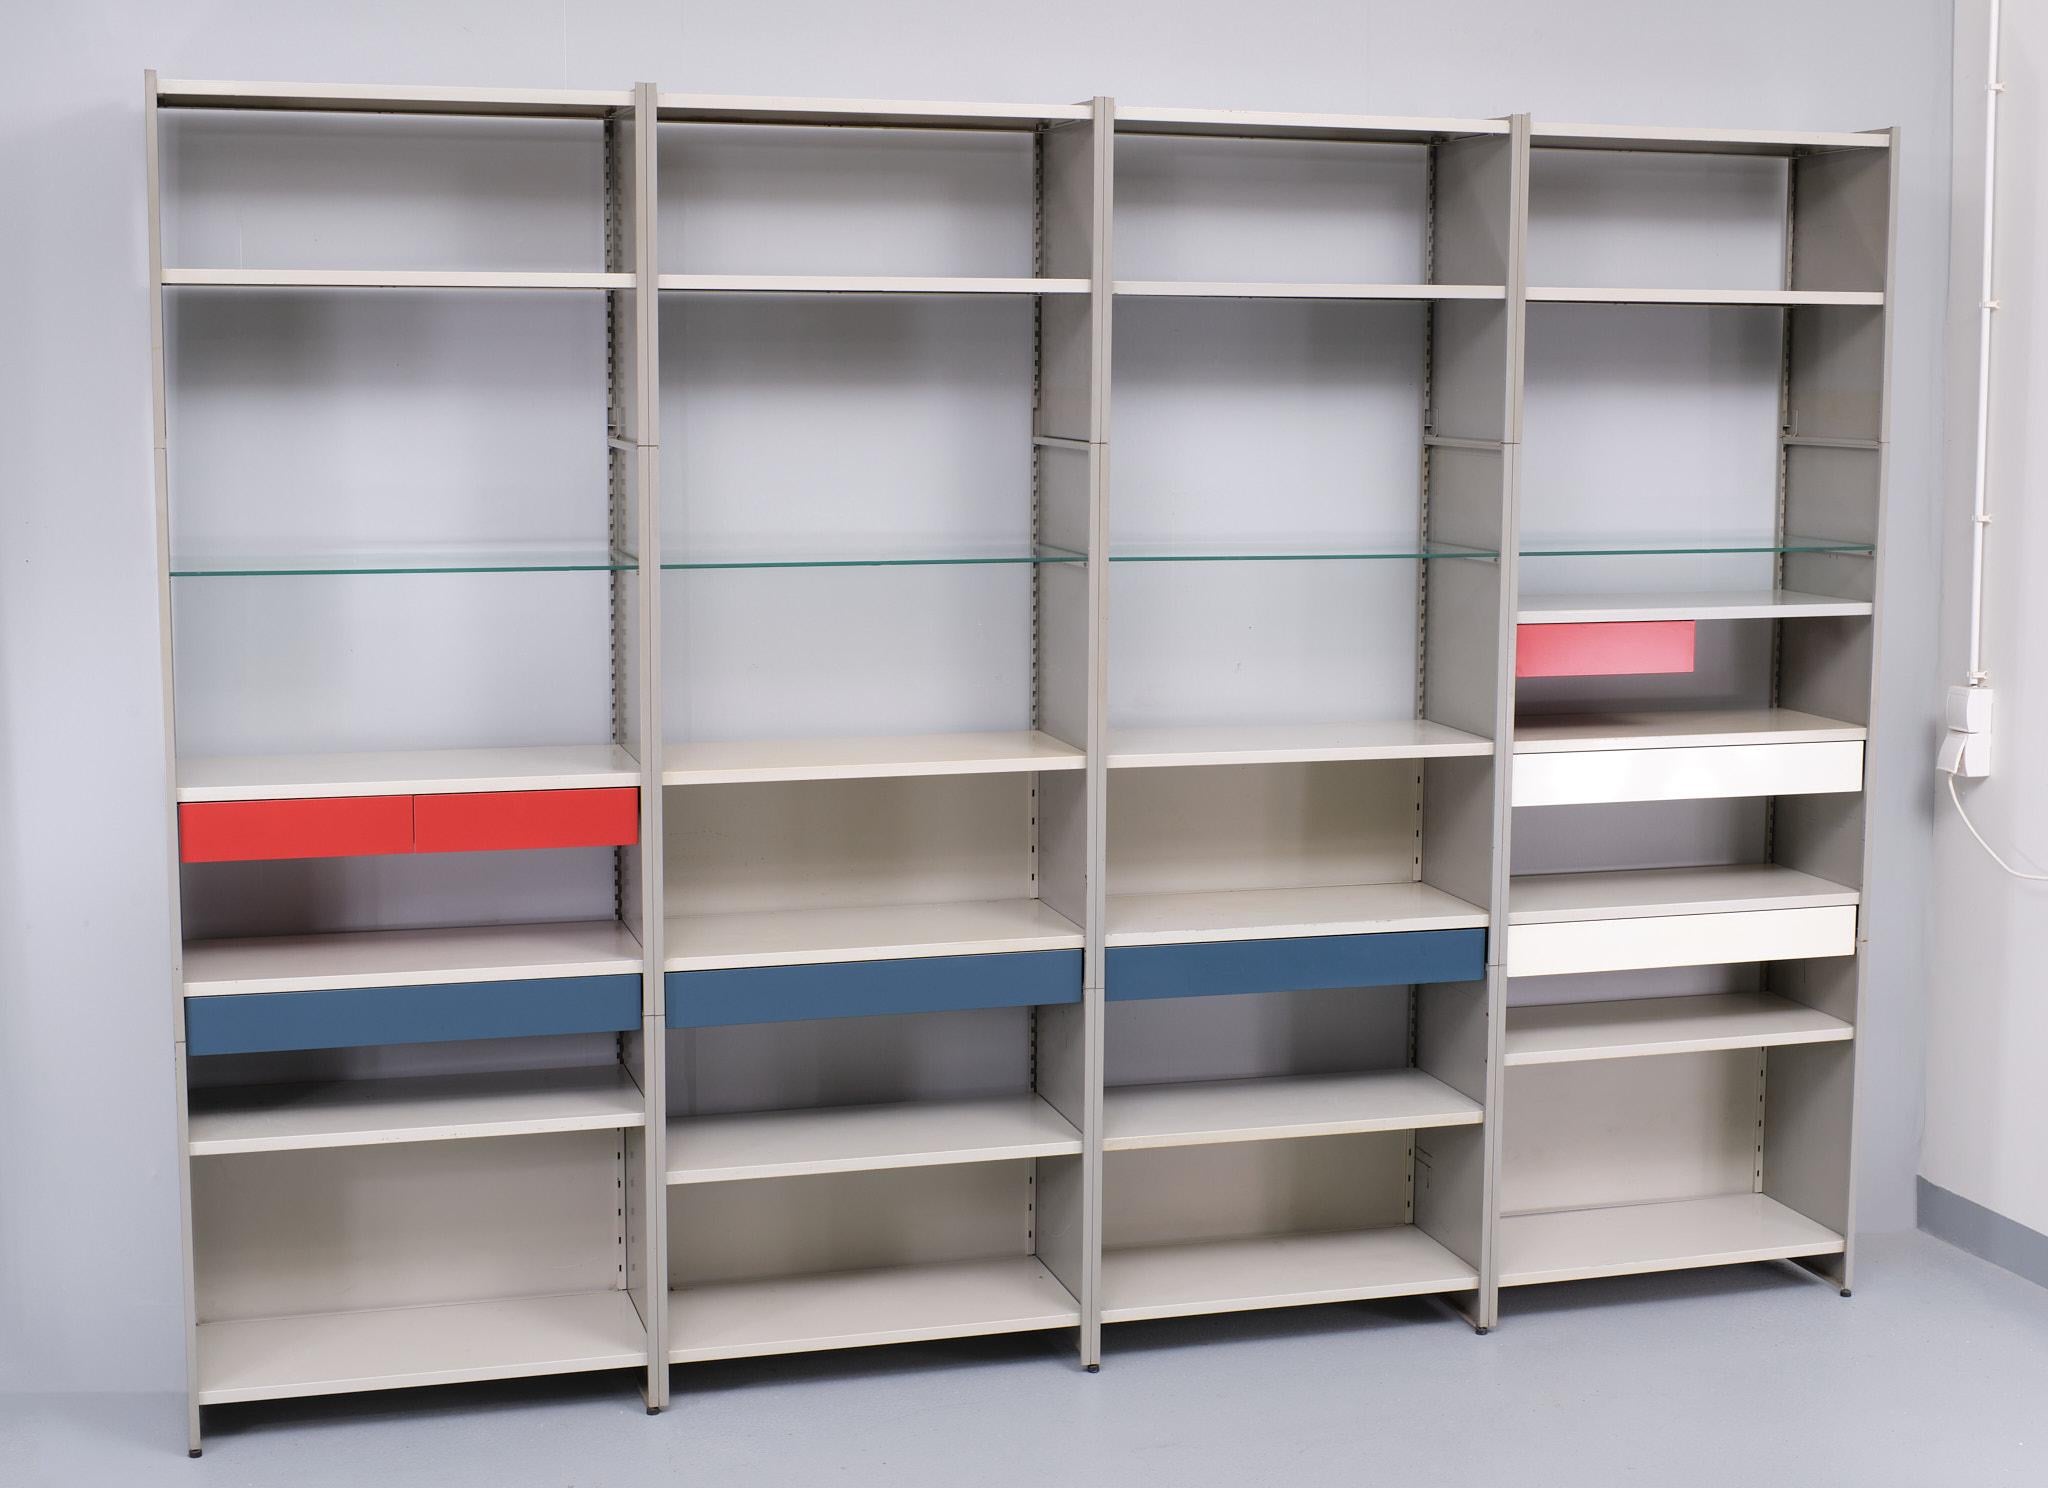 Large Metal modular wall system .design by Andre Cordemeyer for Gispen 
1960 . Holland .''model 5600 '' Mondriaan in style and colors . great designed wall system.
8 drawers in Mondriaan colors 25 shelves 4 Glass . lots of storage space .
